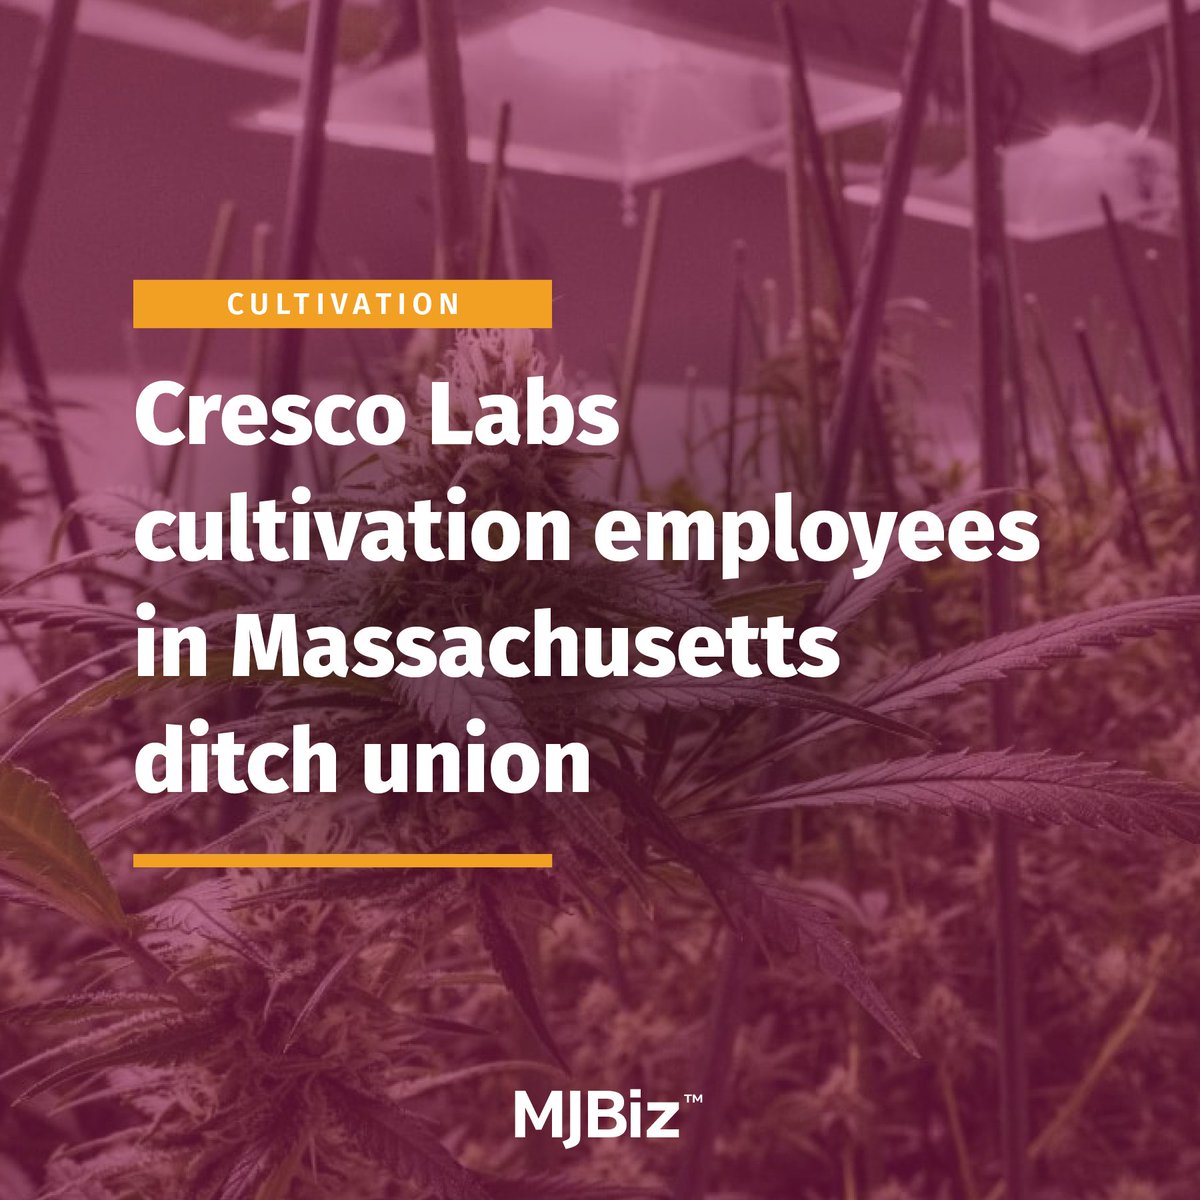 In what is to be believed to be the first instance in the U.S. of a regulated cannabis workplace exiting organized labor, employees at a #CrescoLabs #cannabis cultivation facility in Fall River, #Massachusetts, voted to de-unionize earlier this month. Get the details: